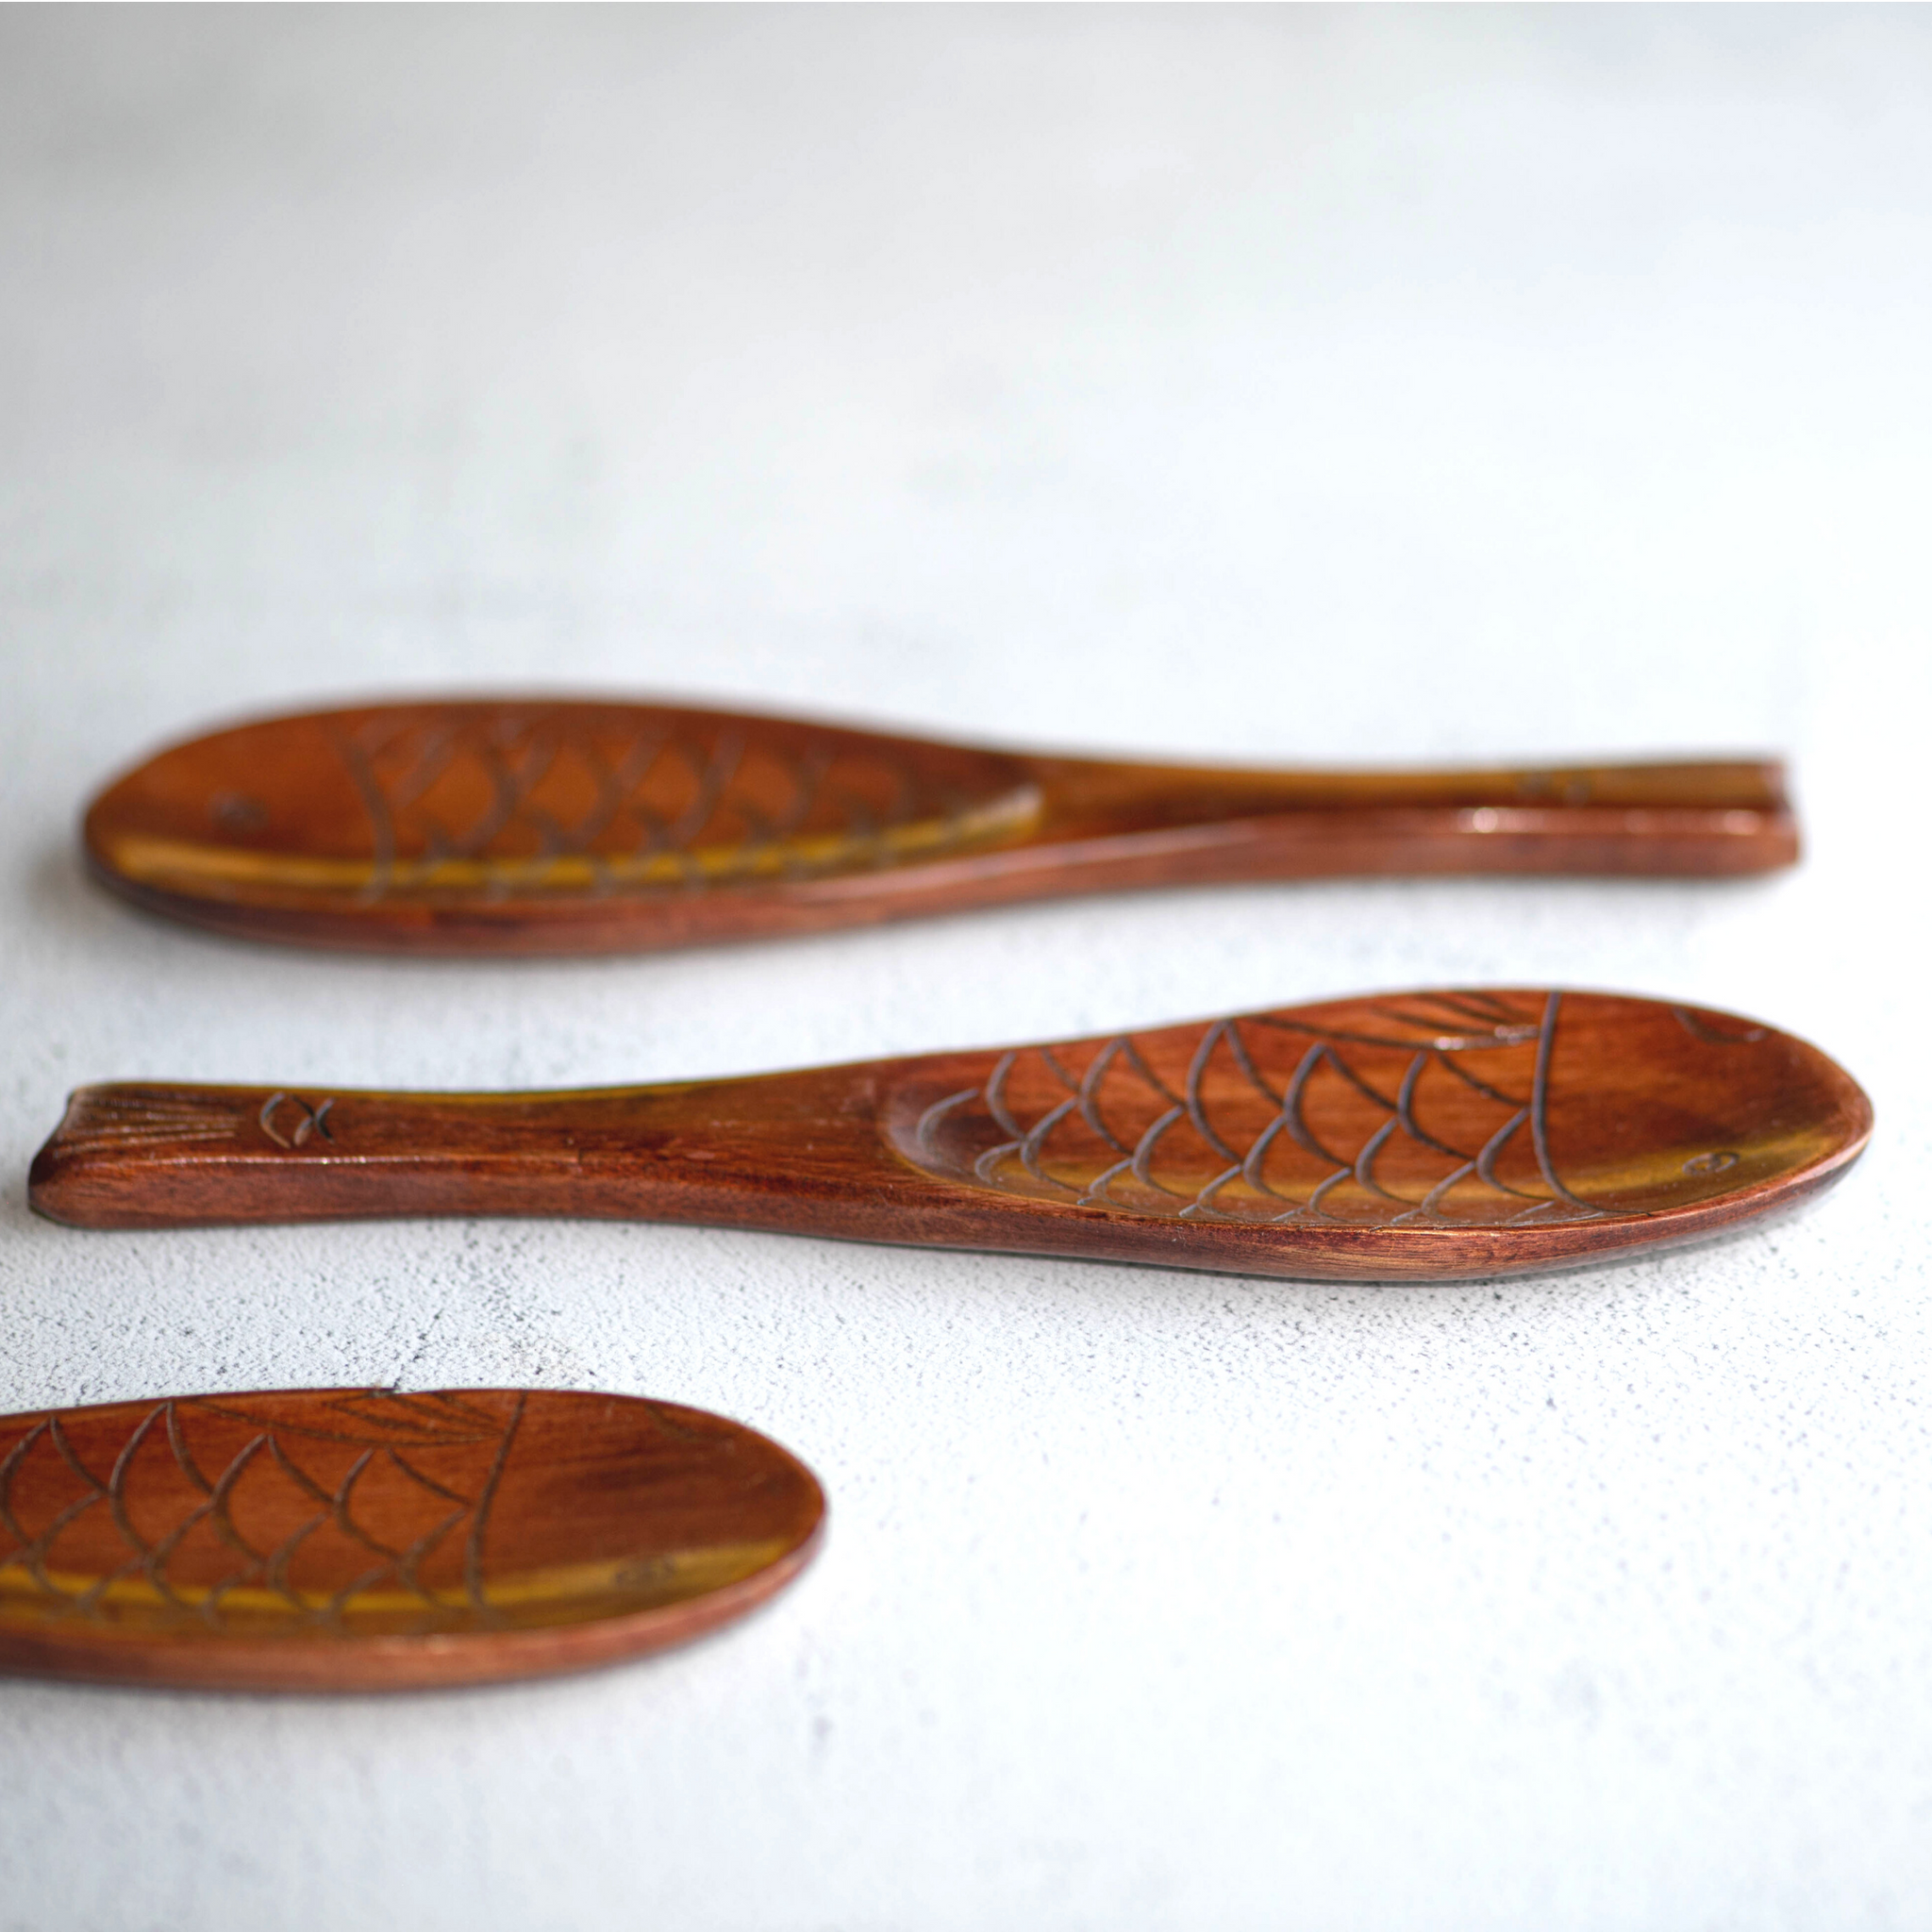 Wooden Rice Spoon- Fish Shaped Rice Paddle